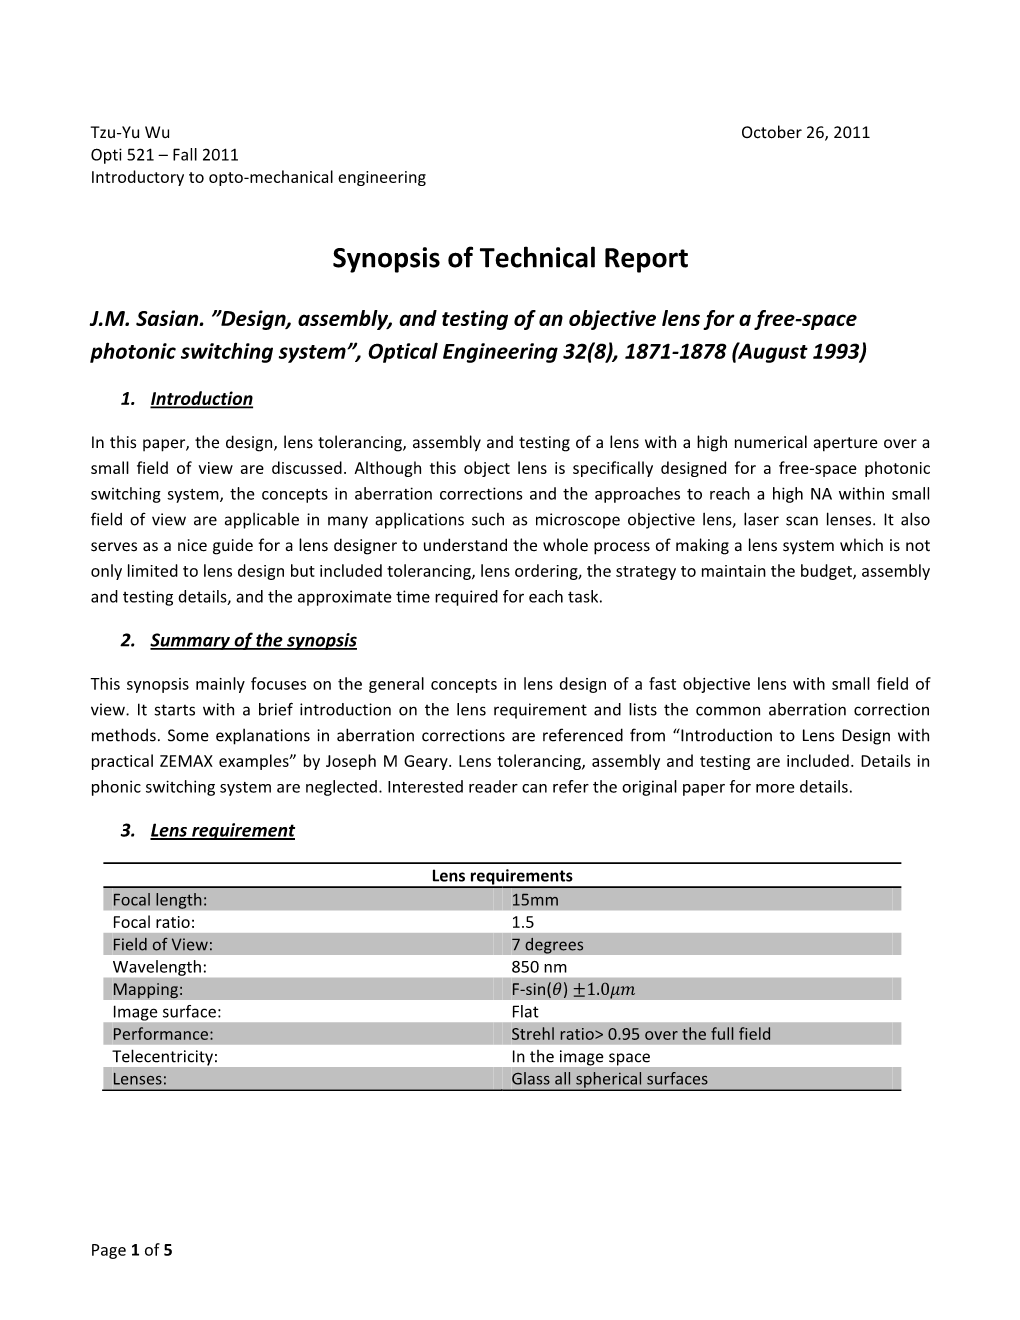 Synopsis of Technical Report